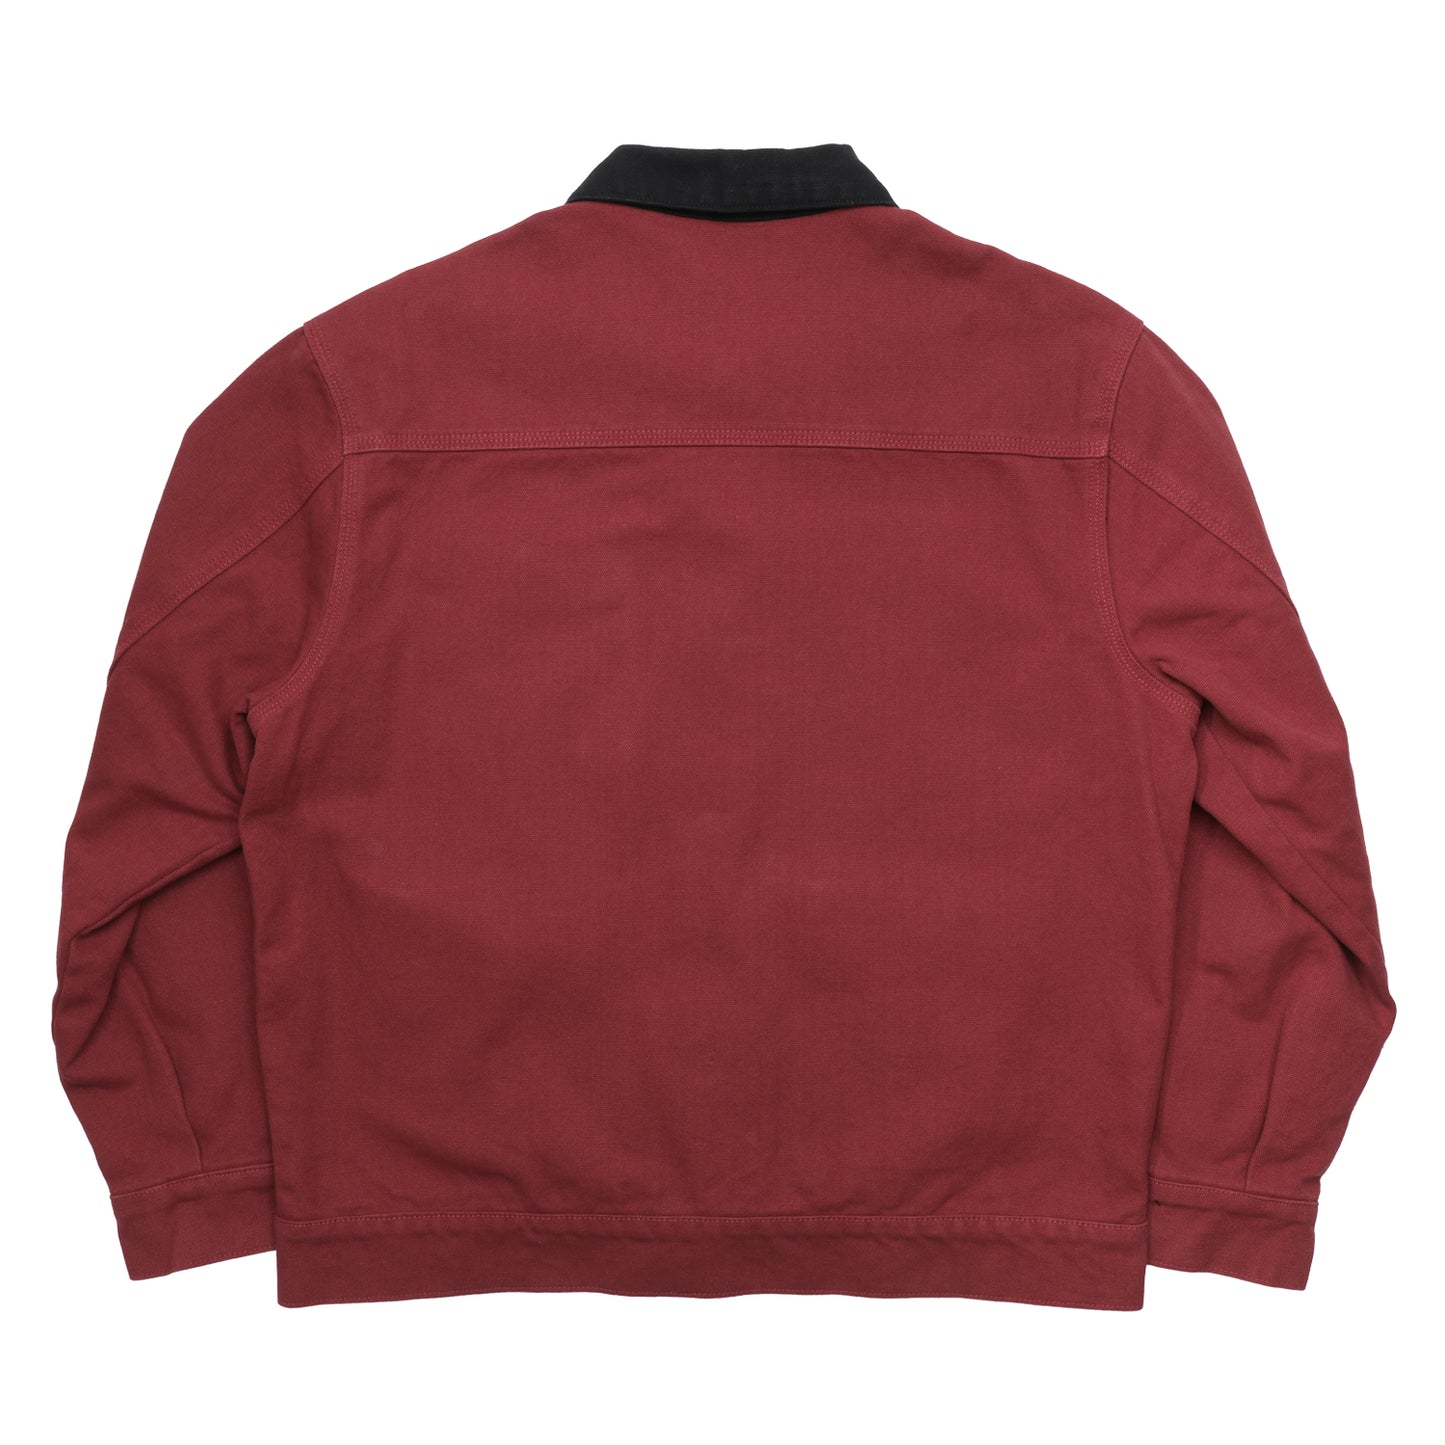 Workers Late Jacket, Red